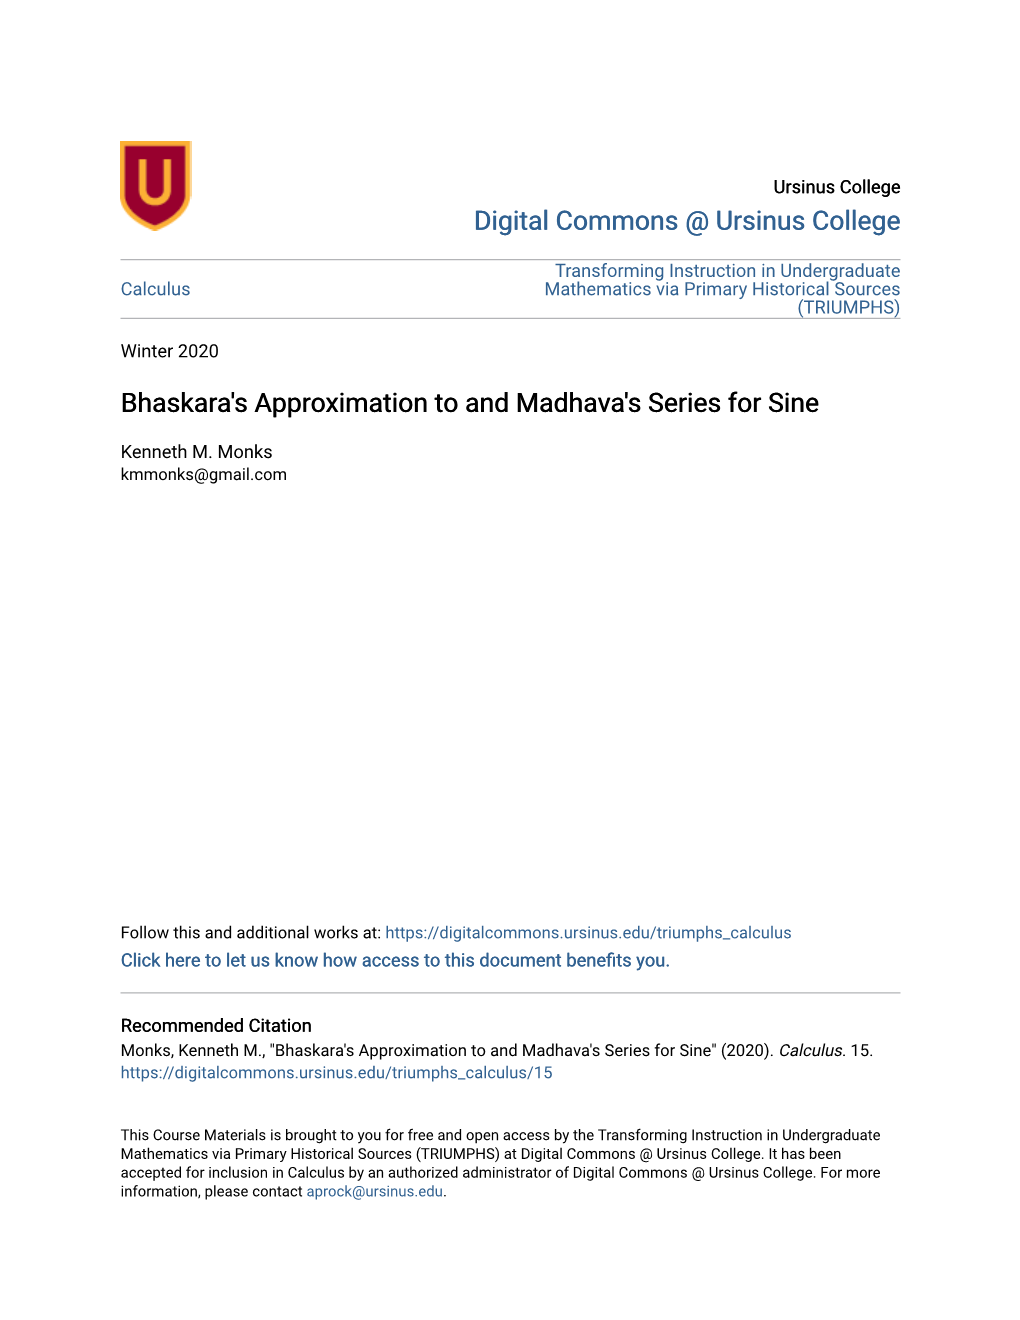 Bhaskara's Approximation to and Madhava's Series for Sine